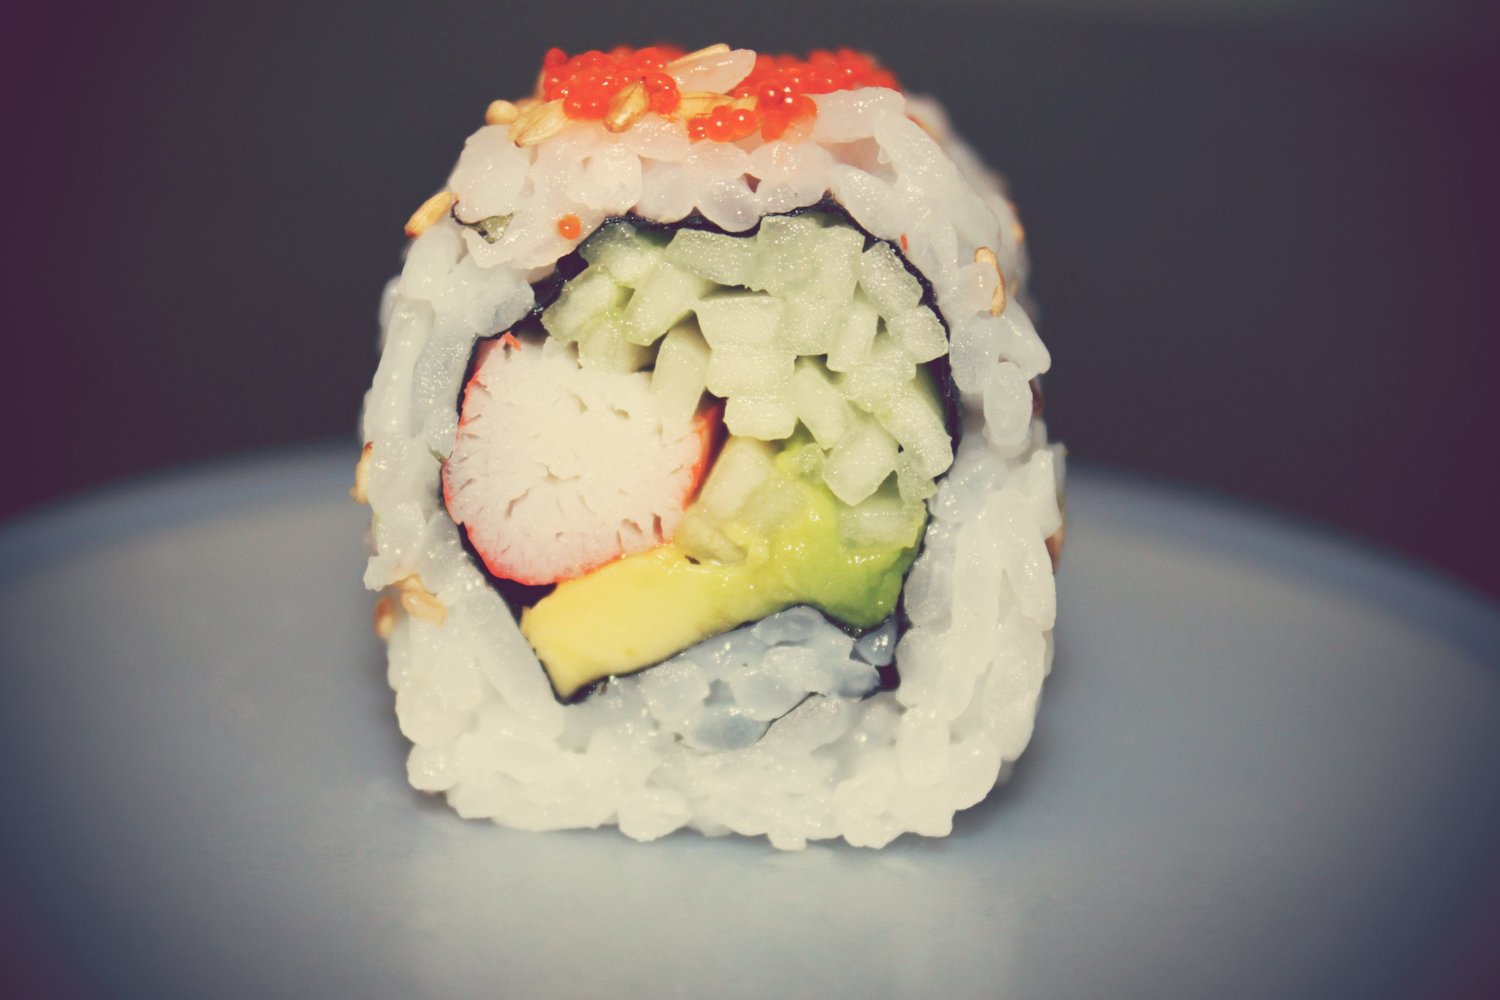 The California roll was created in Canada by Japanese-born sushi chef Hidekazu Tojo. He aimed to construct a roll that would appeal to North Americans, who were often skeptical of eating seaweed and raw fish.